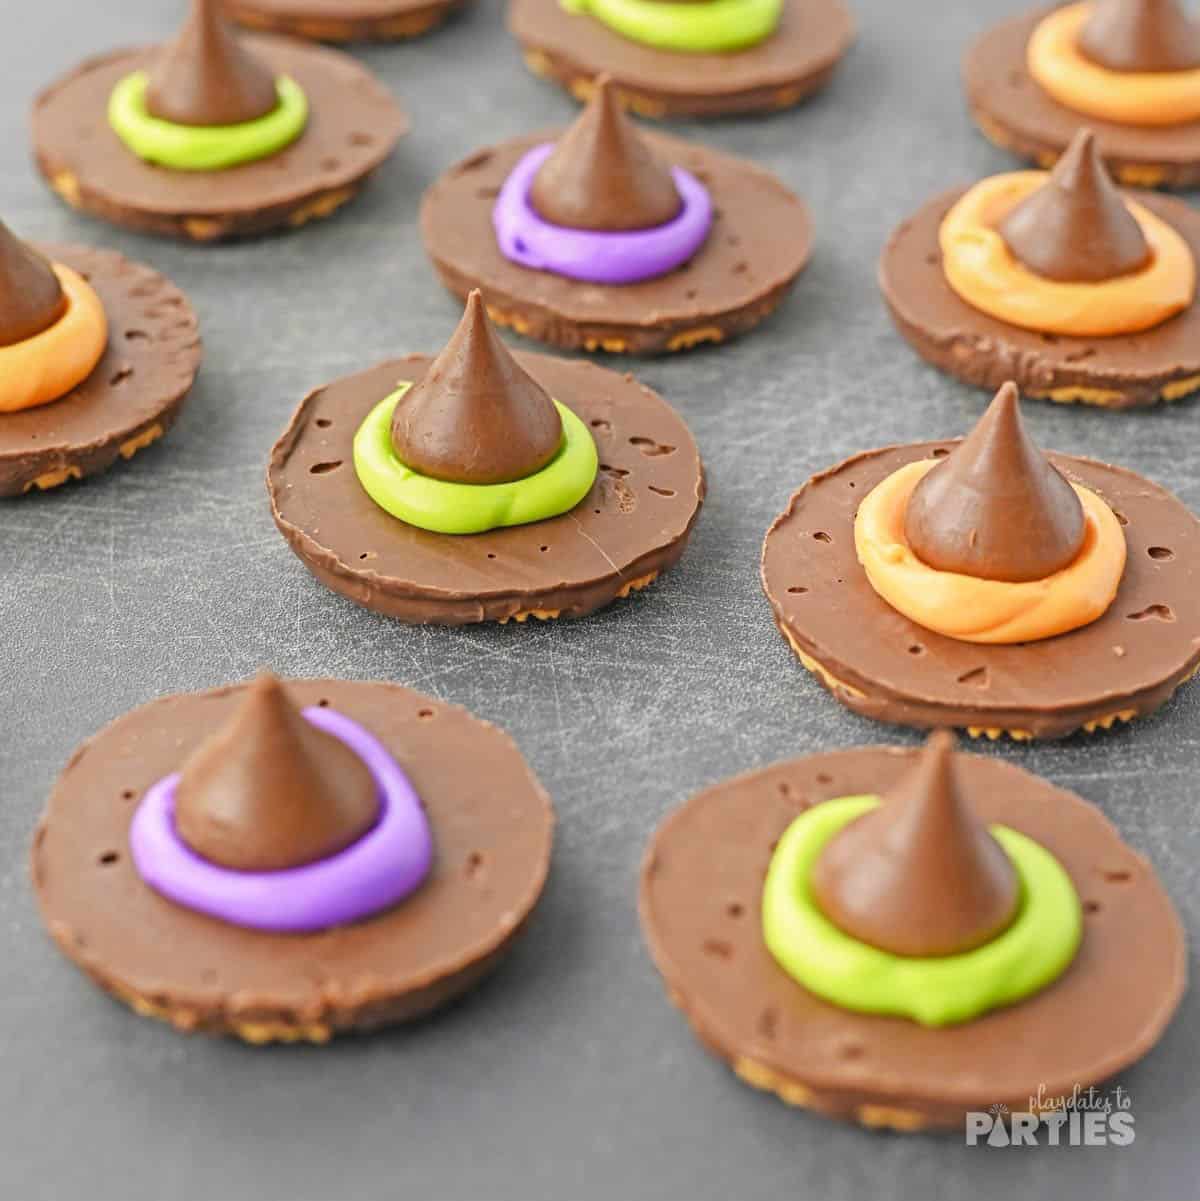 Hershey's kisses are glued to chocolate cookies with colorful ici.